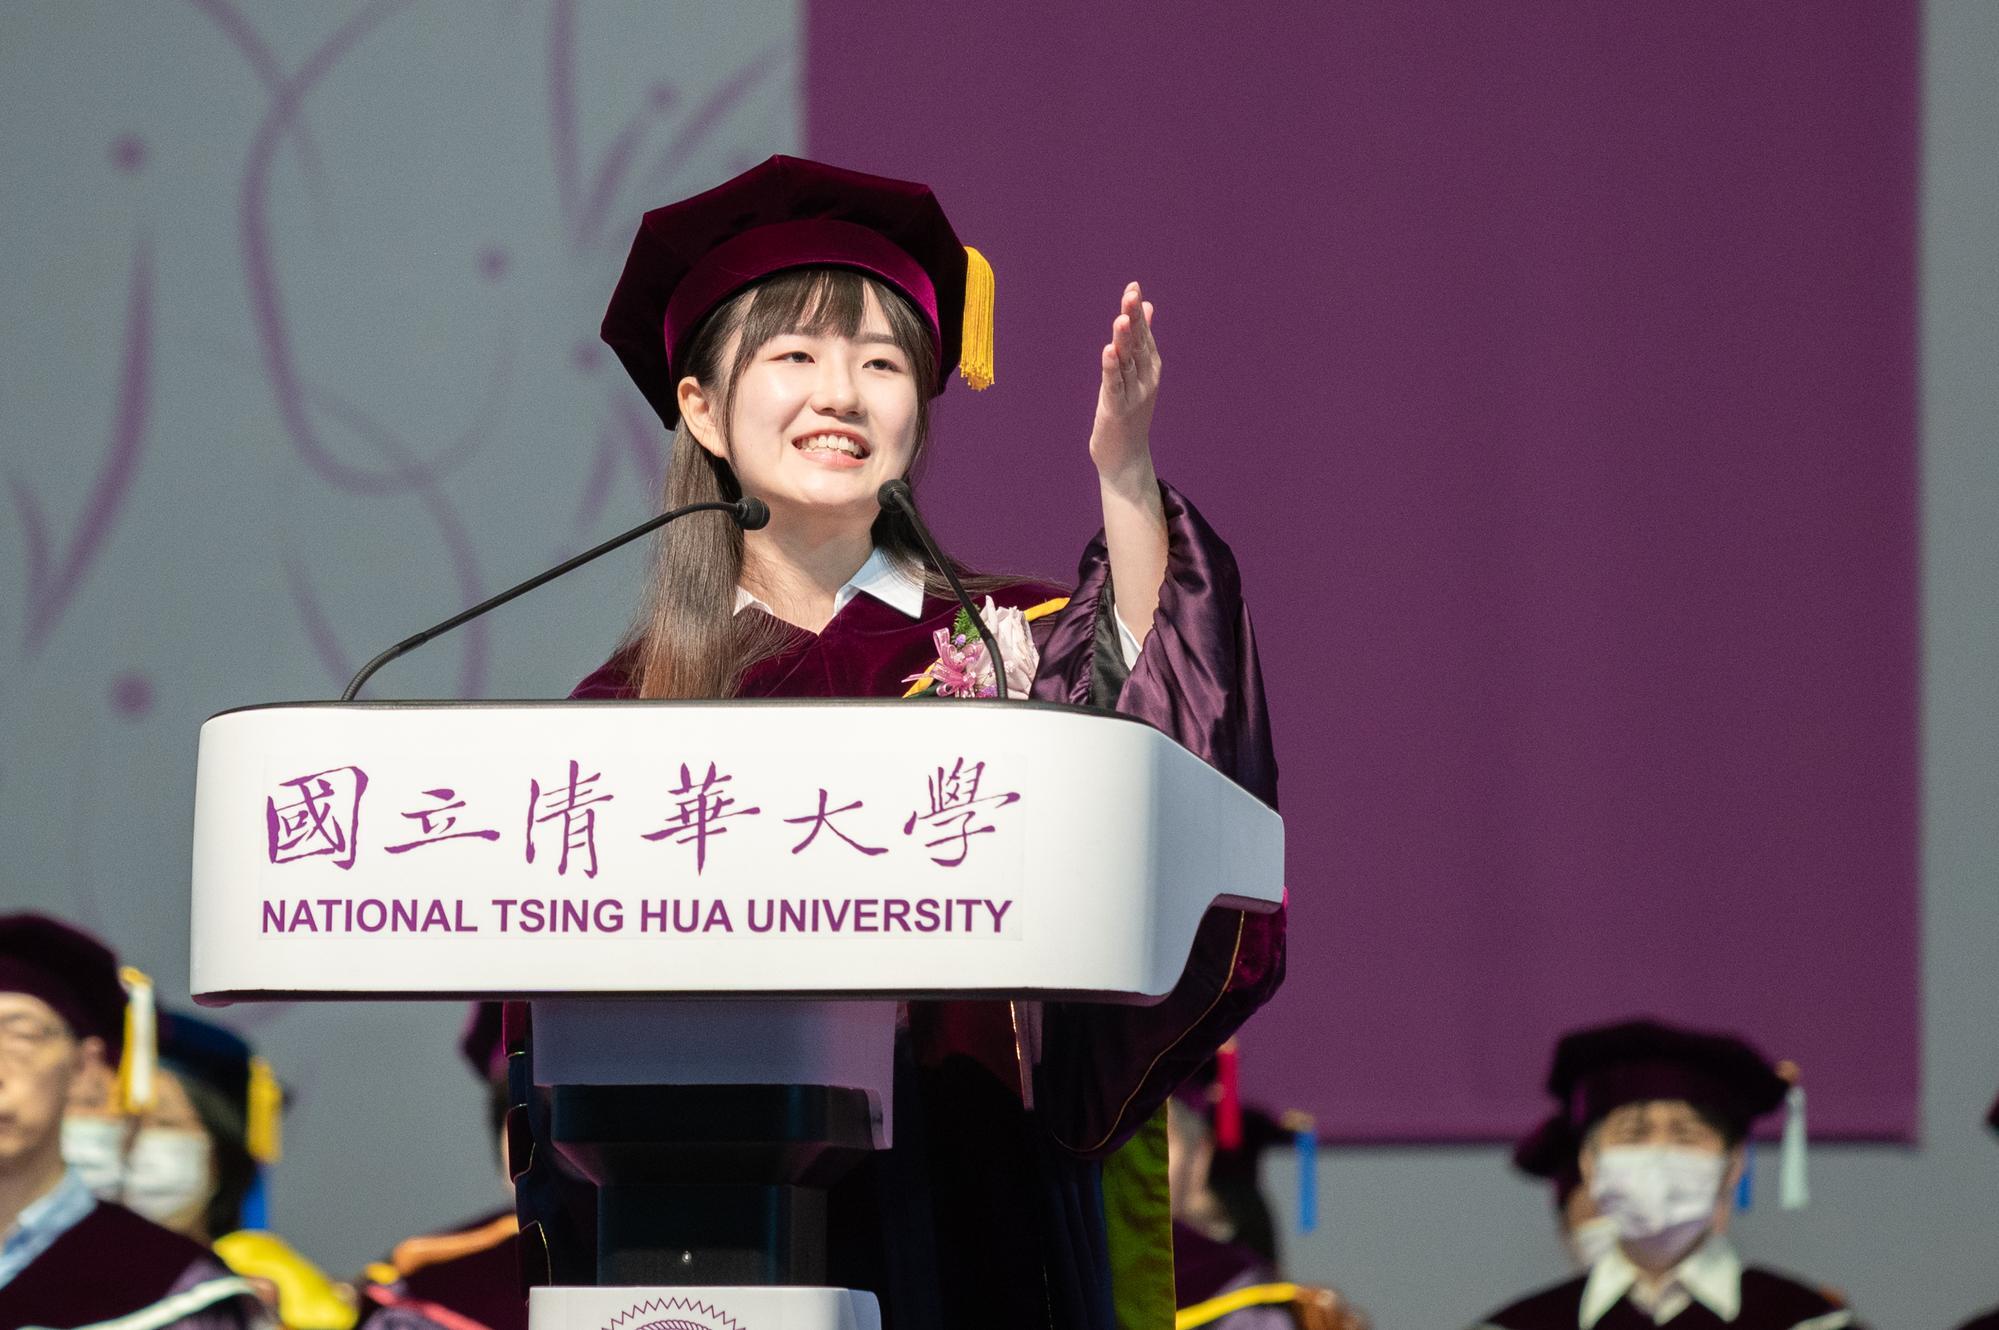 Representing the graduating students, Chi-hsien Wang (王祺嫻) encourages her fellow graduates to step out into the world with the NTHU spirit.